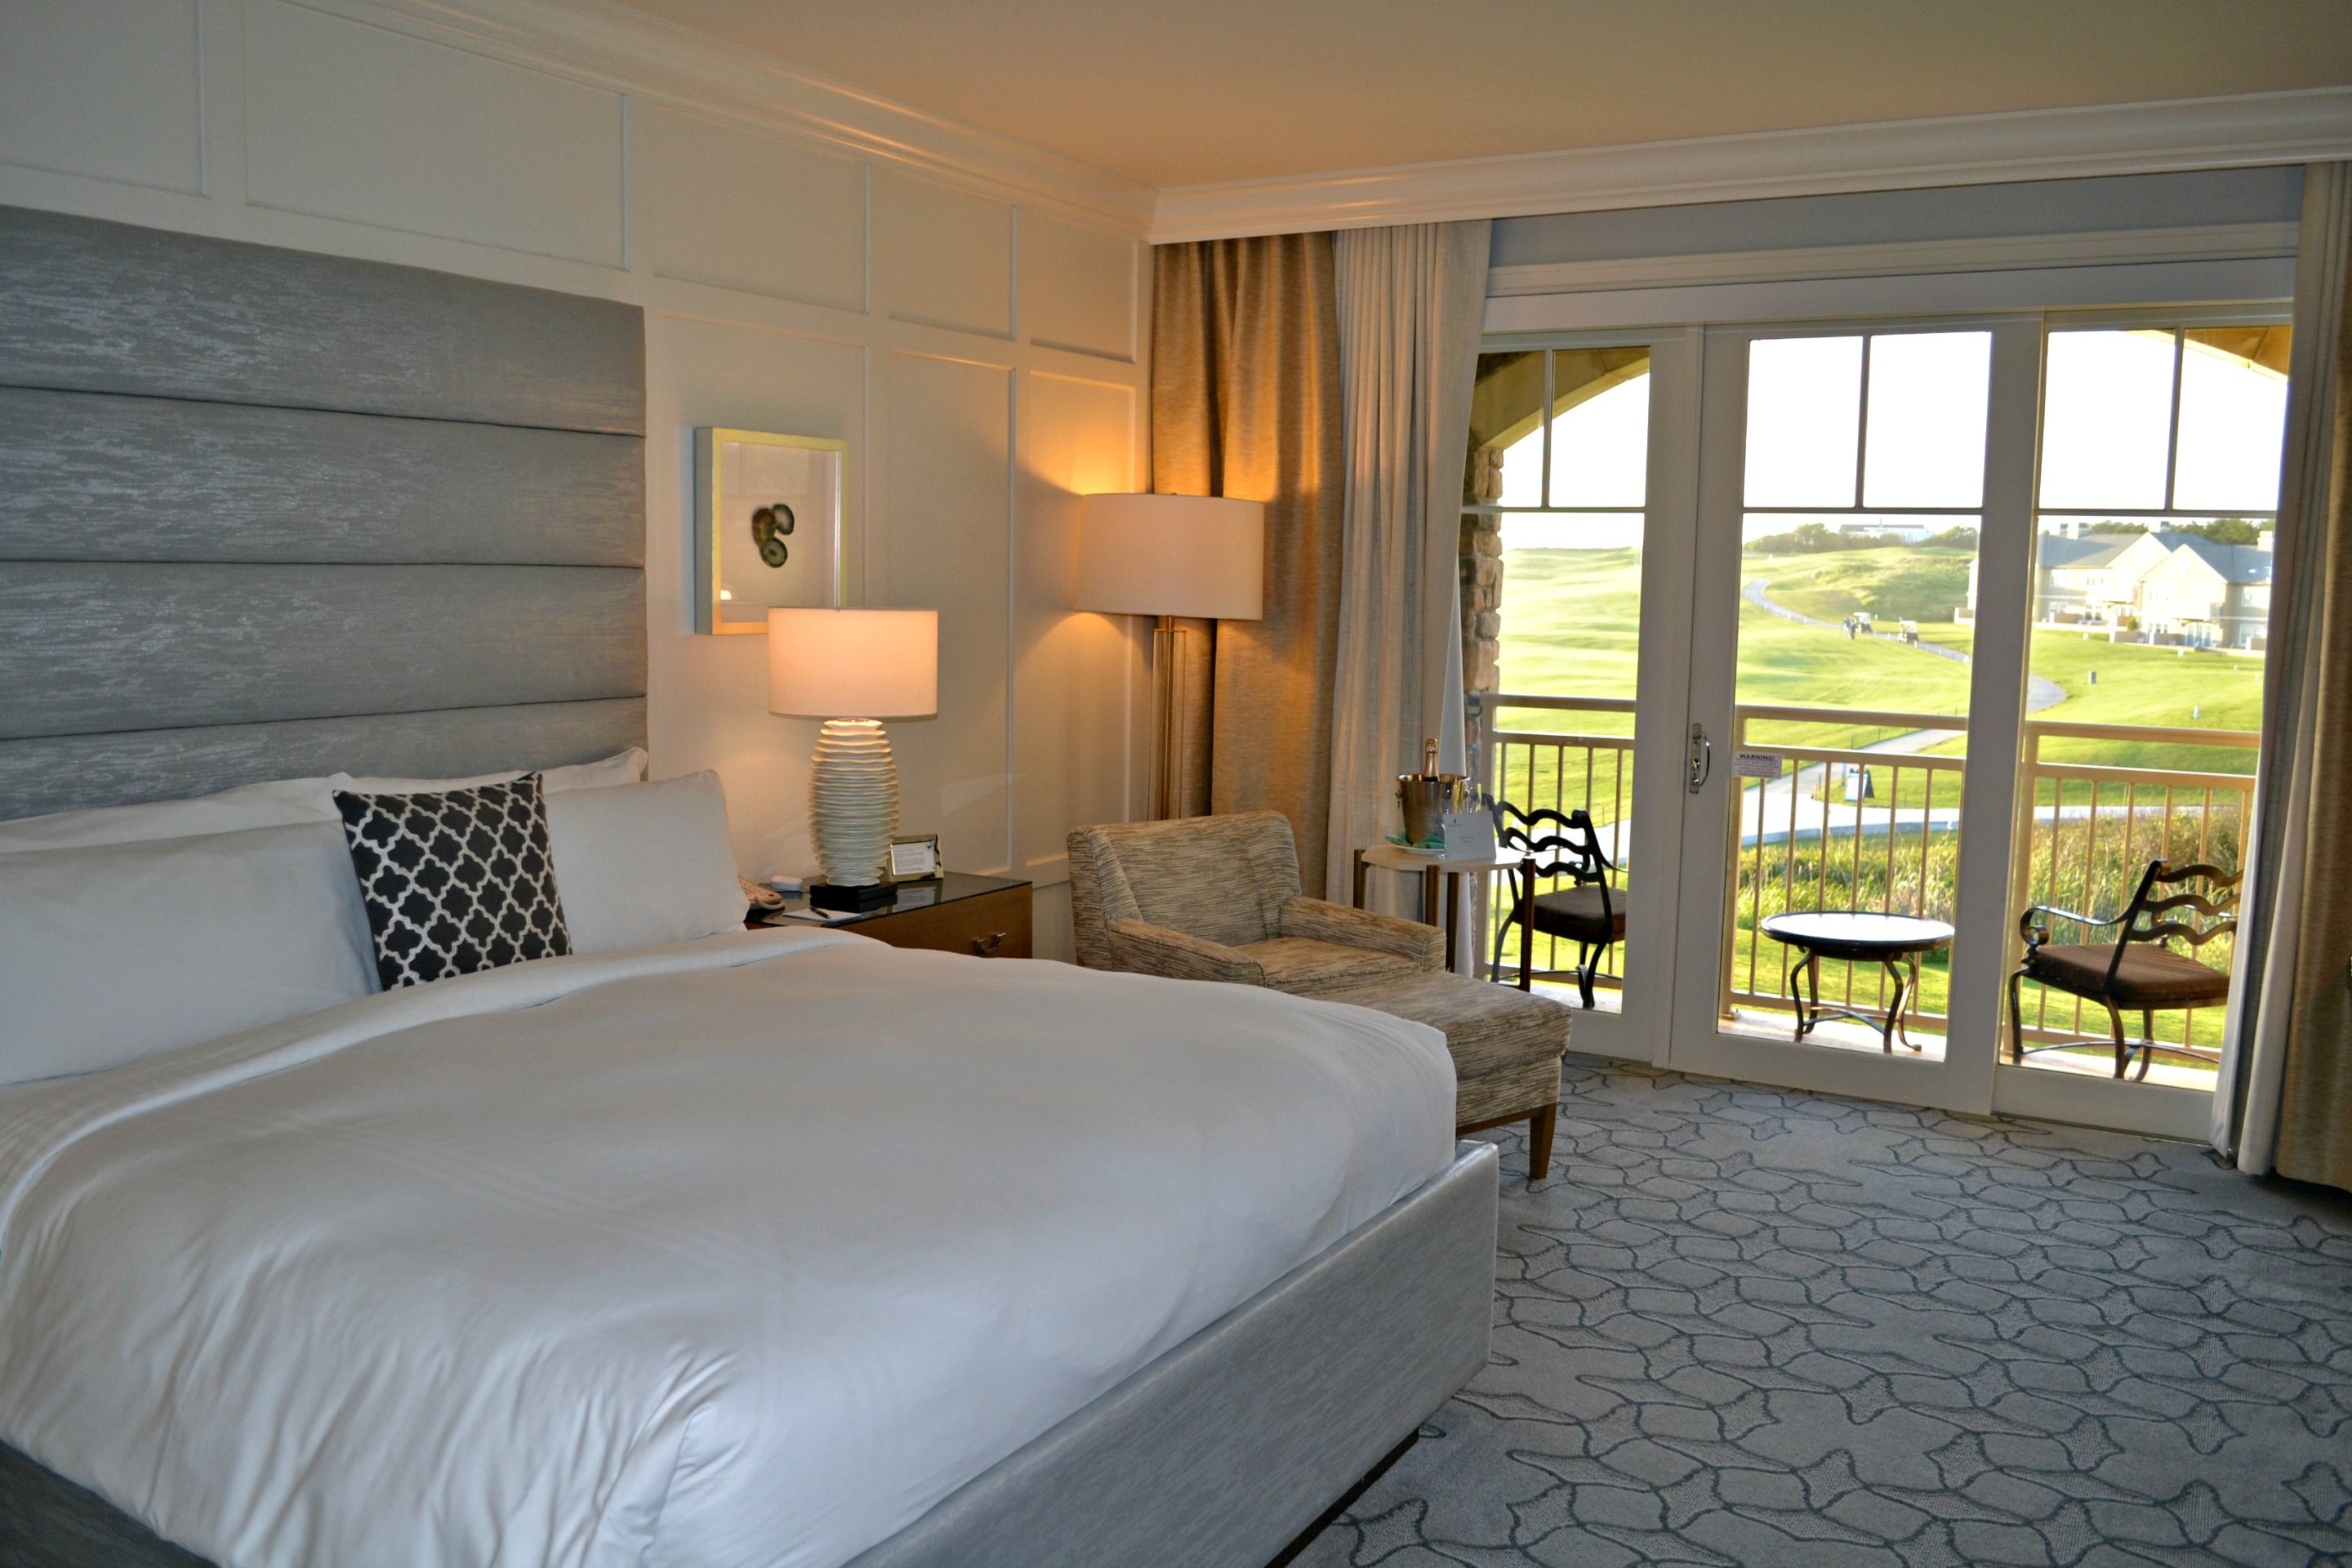 Newly renovated rooms take in the views 